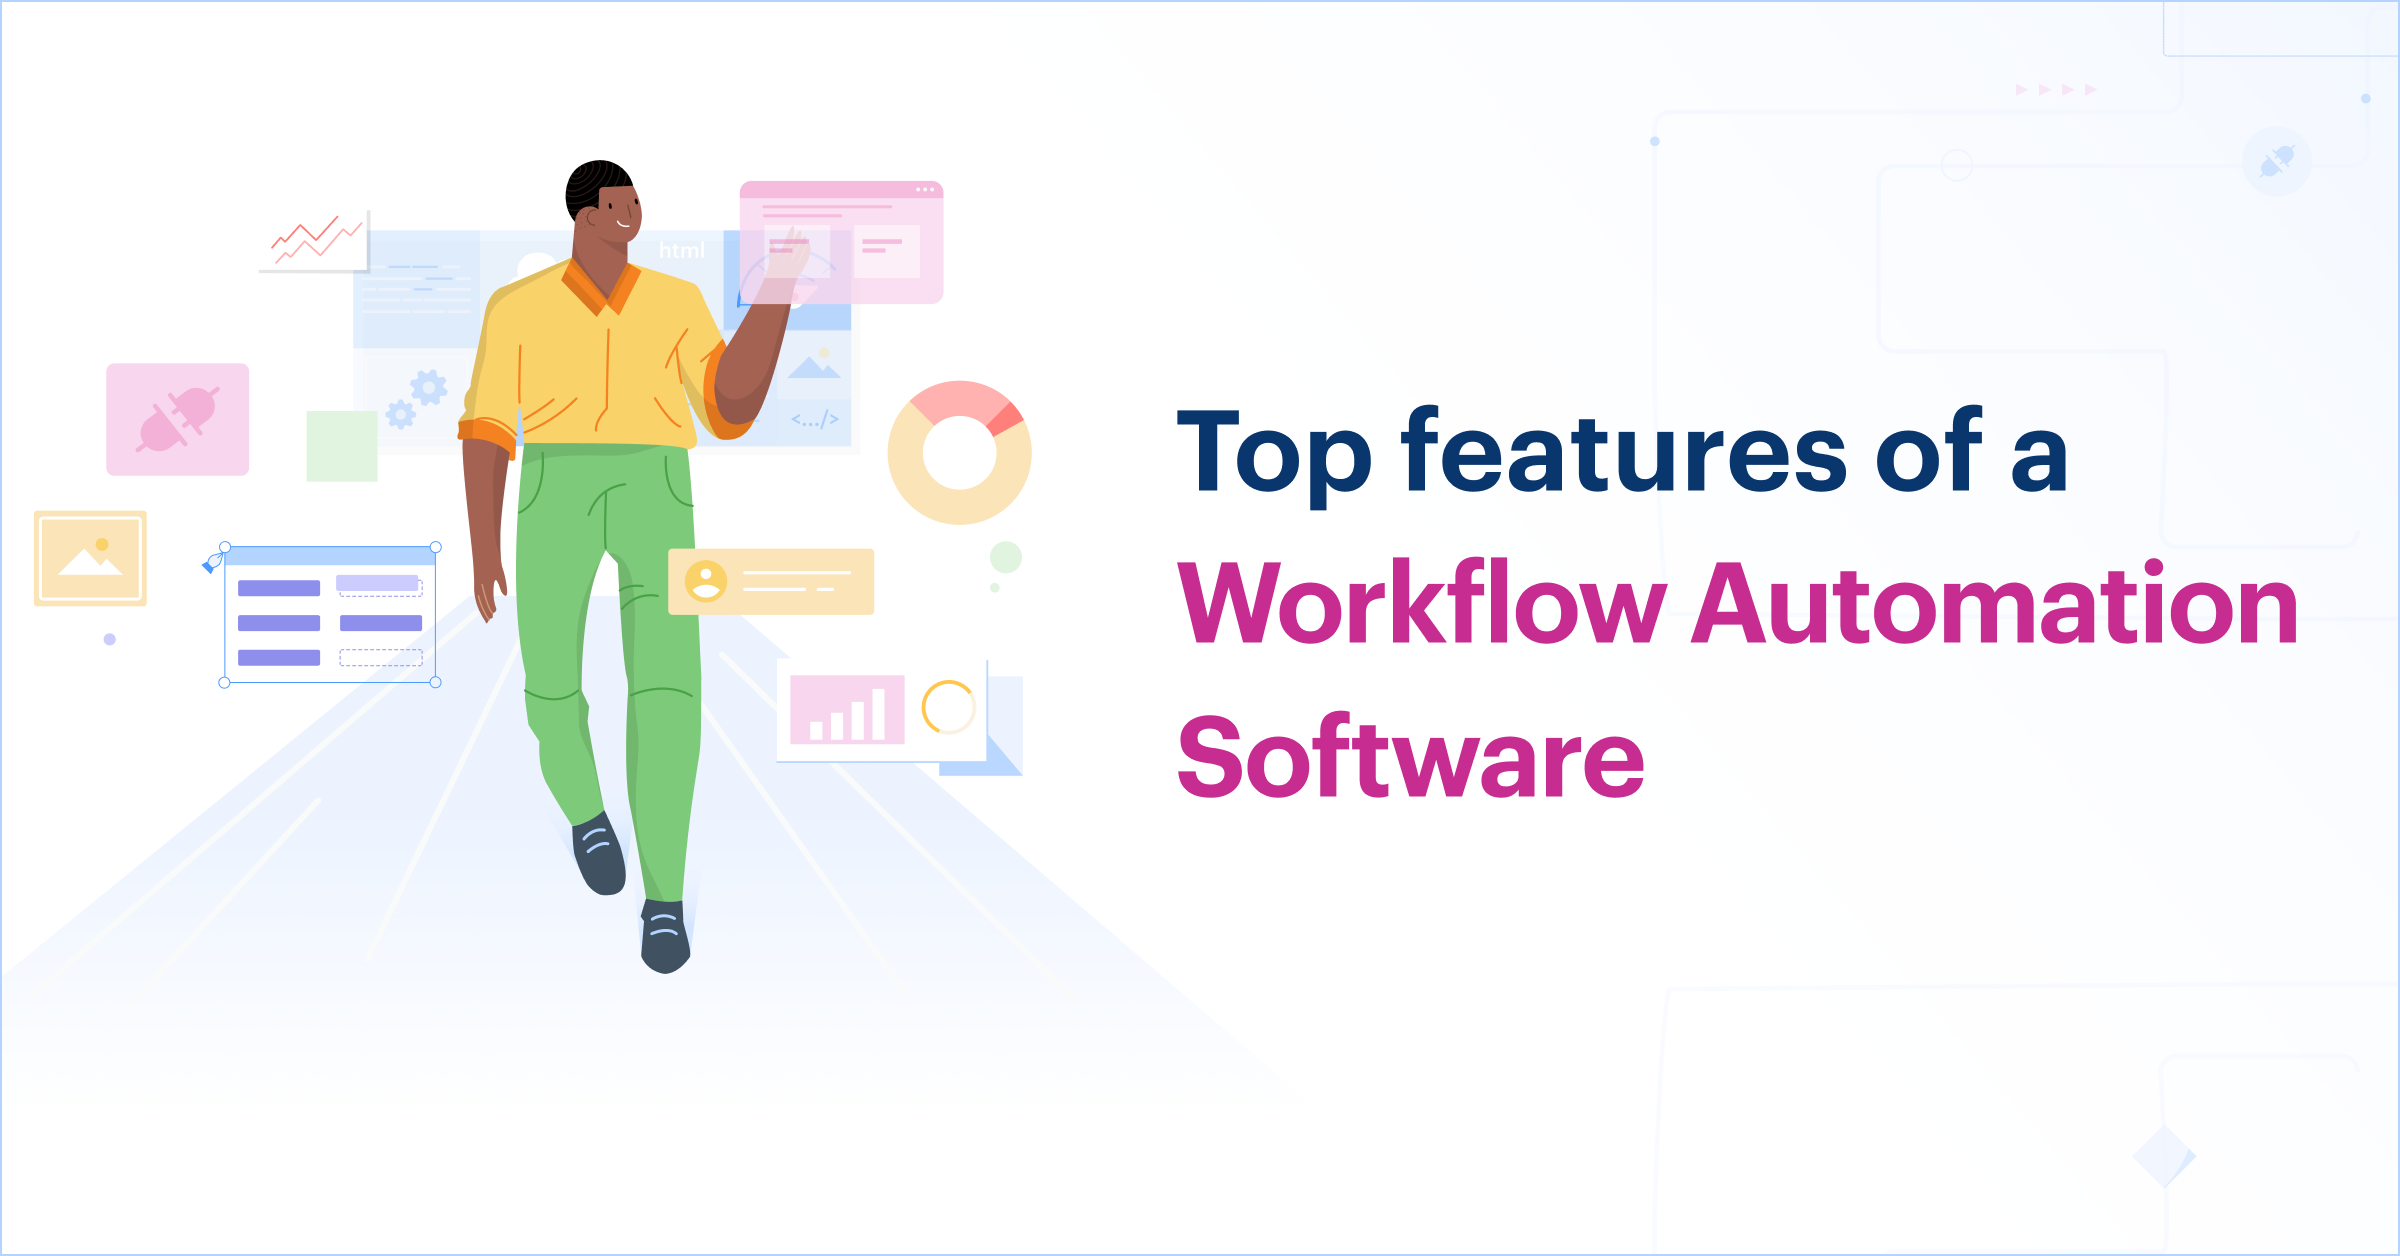 Top features of a Workflow Automation Software